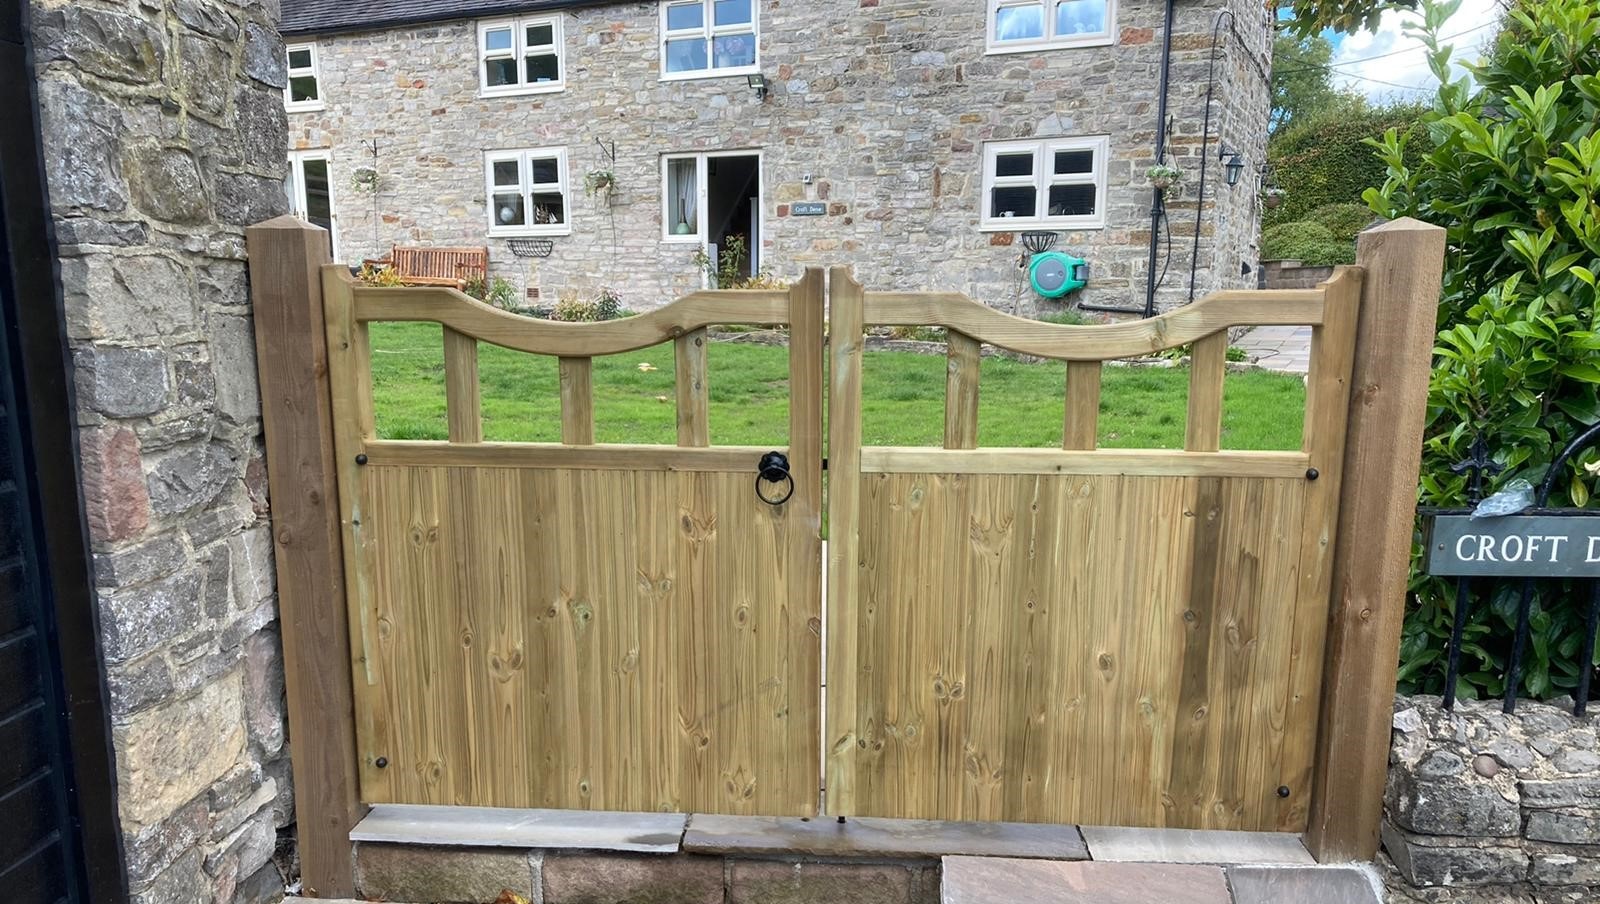 Derbyhire made to measure double wooden gates with a pressure treated timber construction